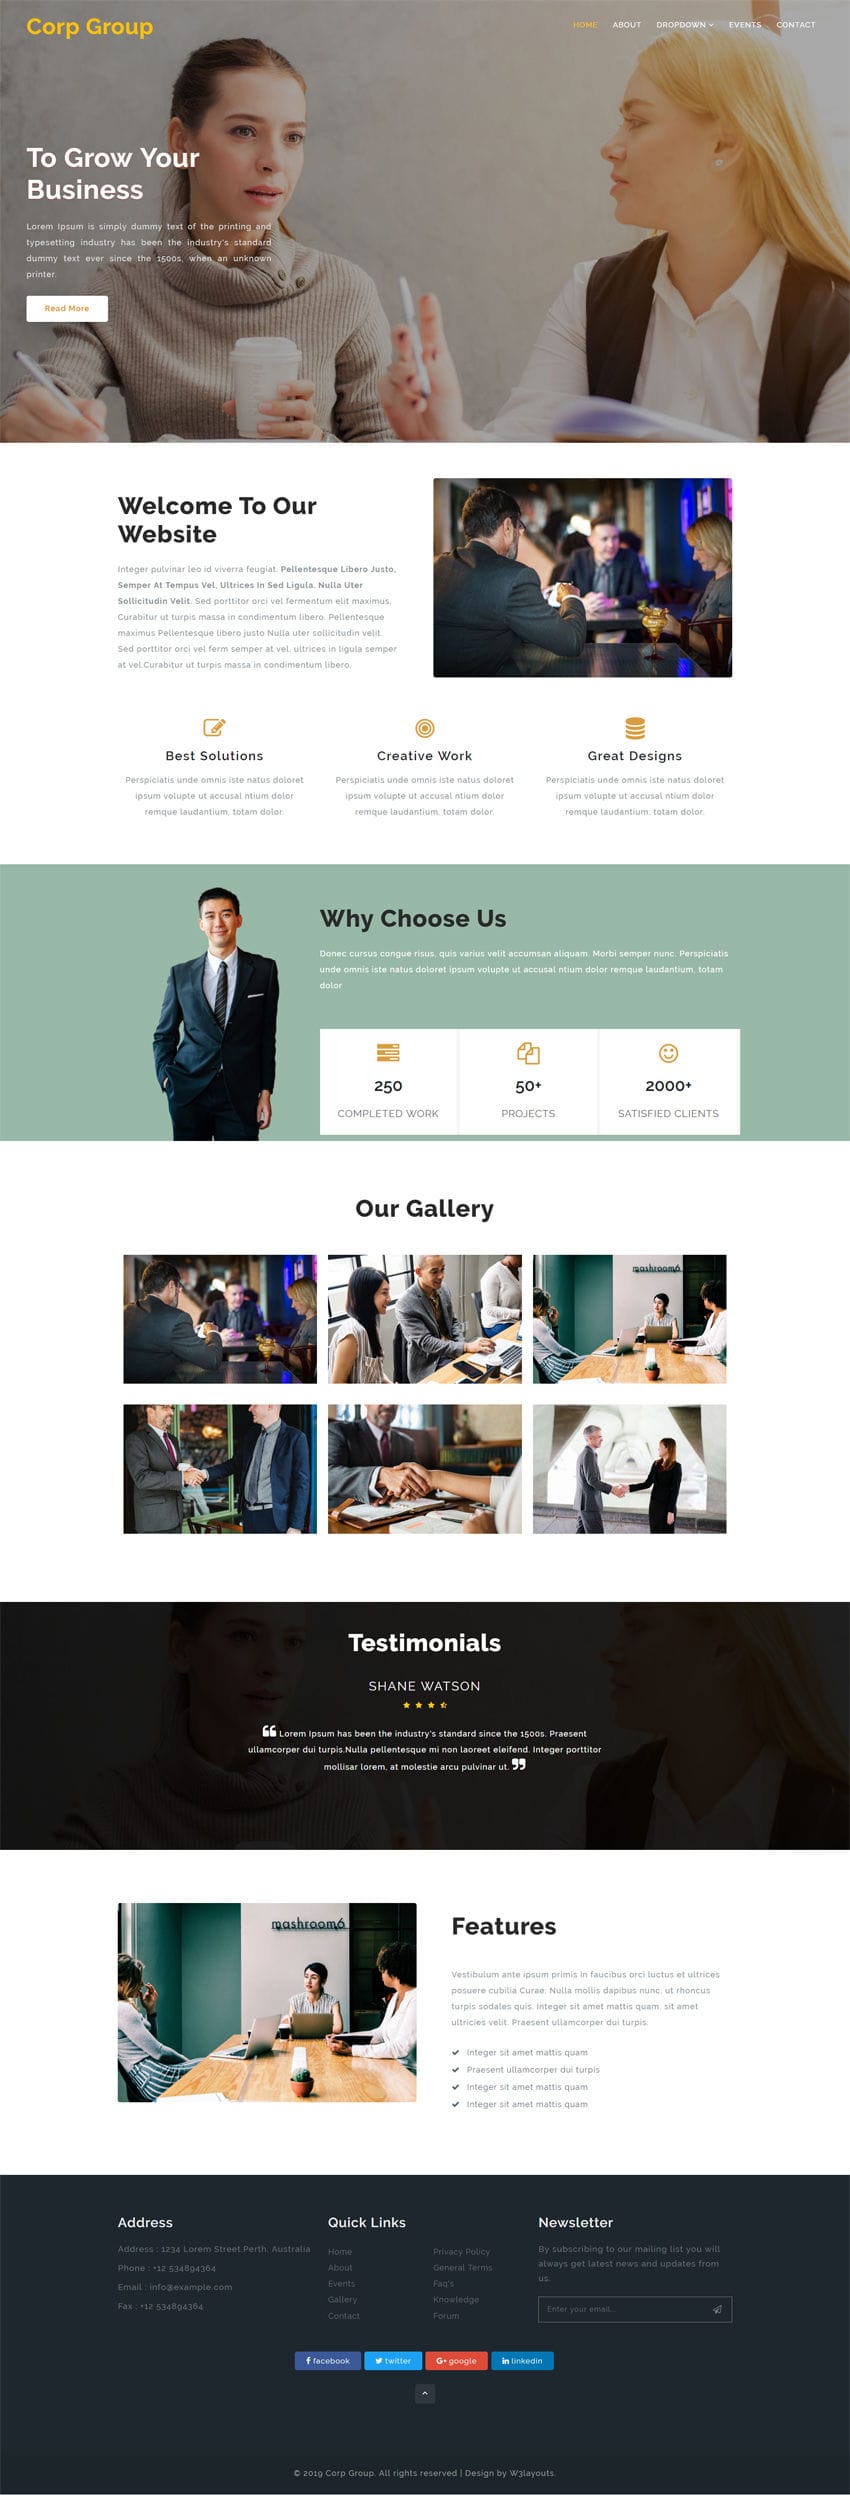 Corp Group is a free website template for corporates, agencies and similar businesses. This HTML web template will give your agency a stunning web presence.